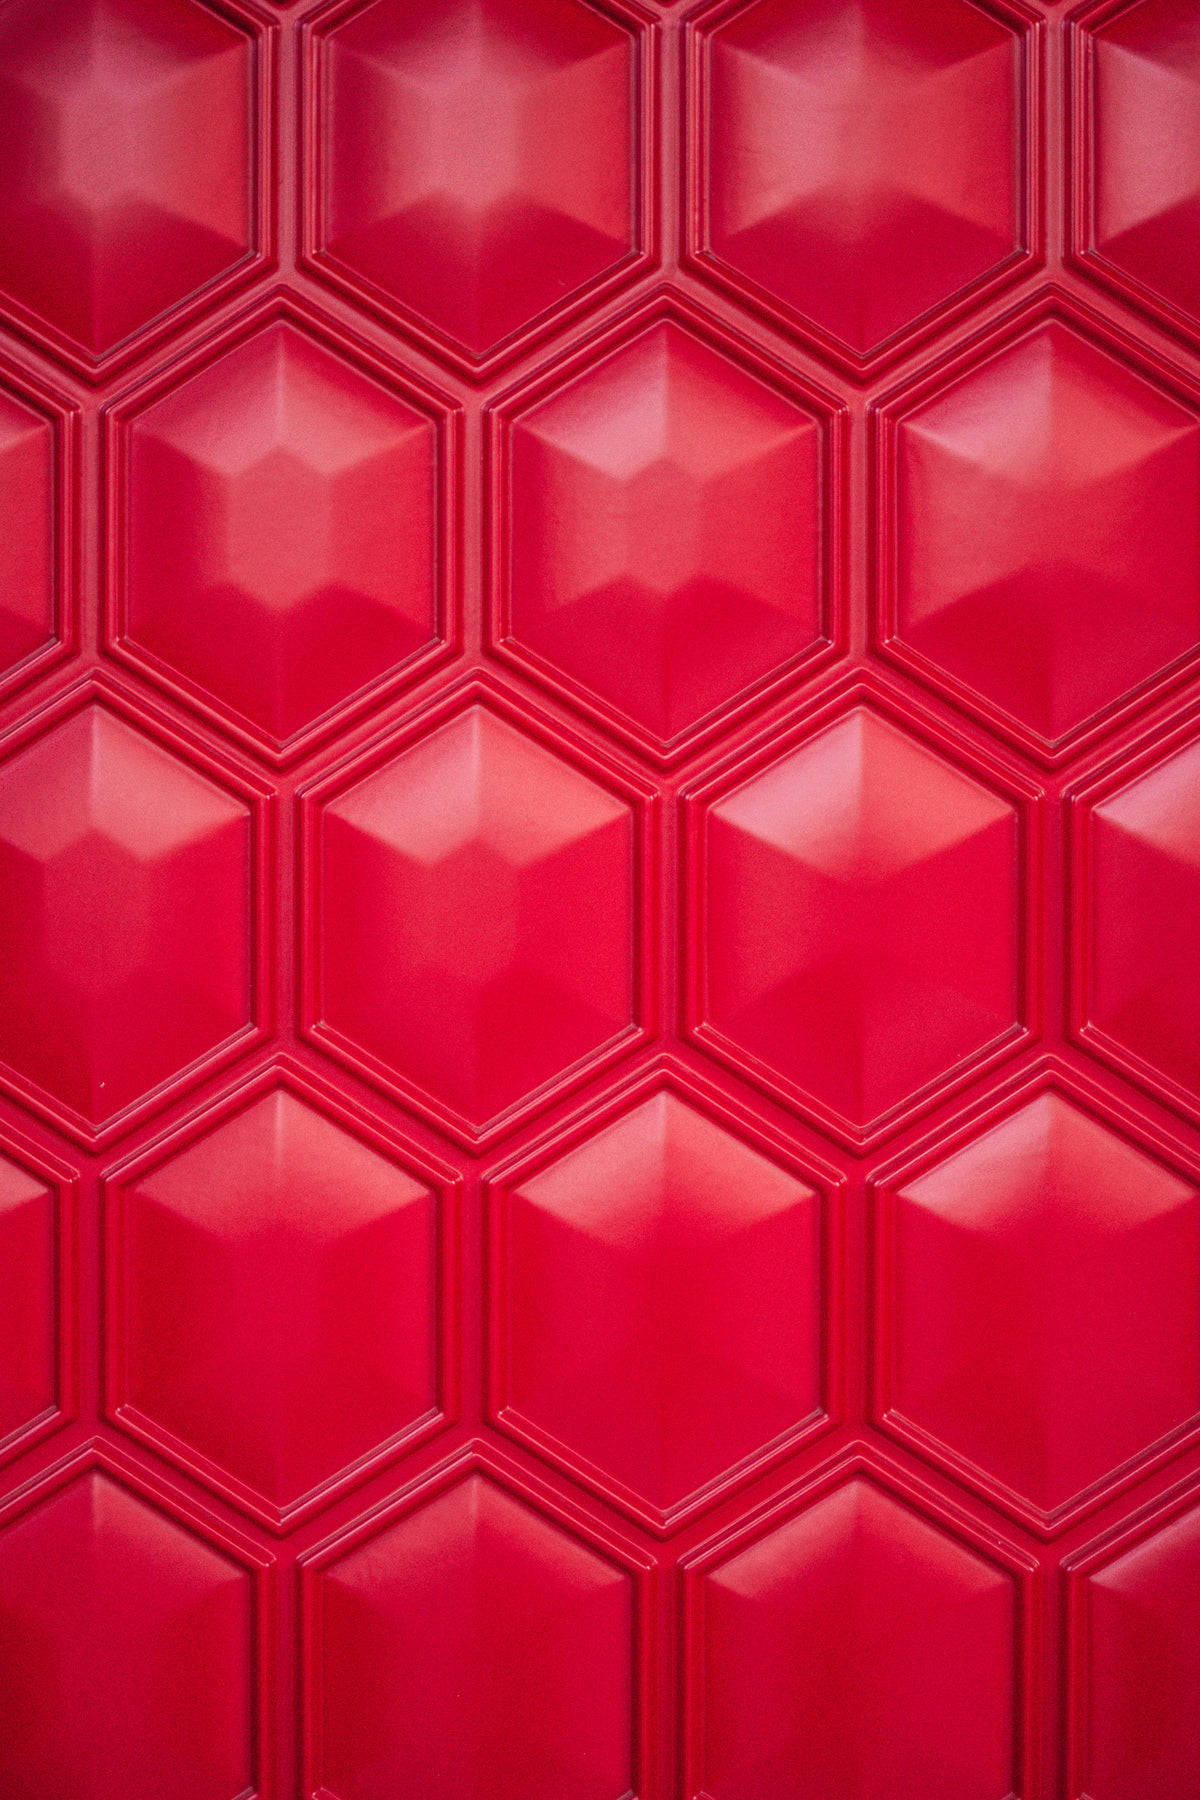 Red Grid Wall Texture Wallpaper